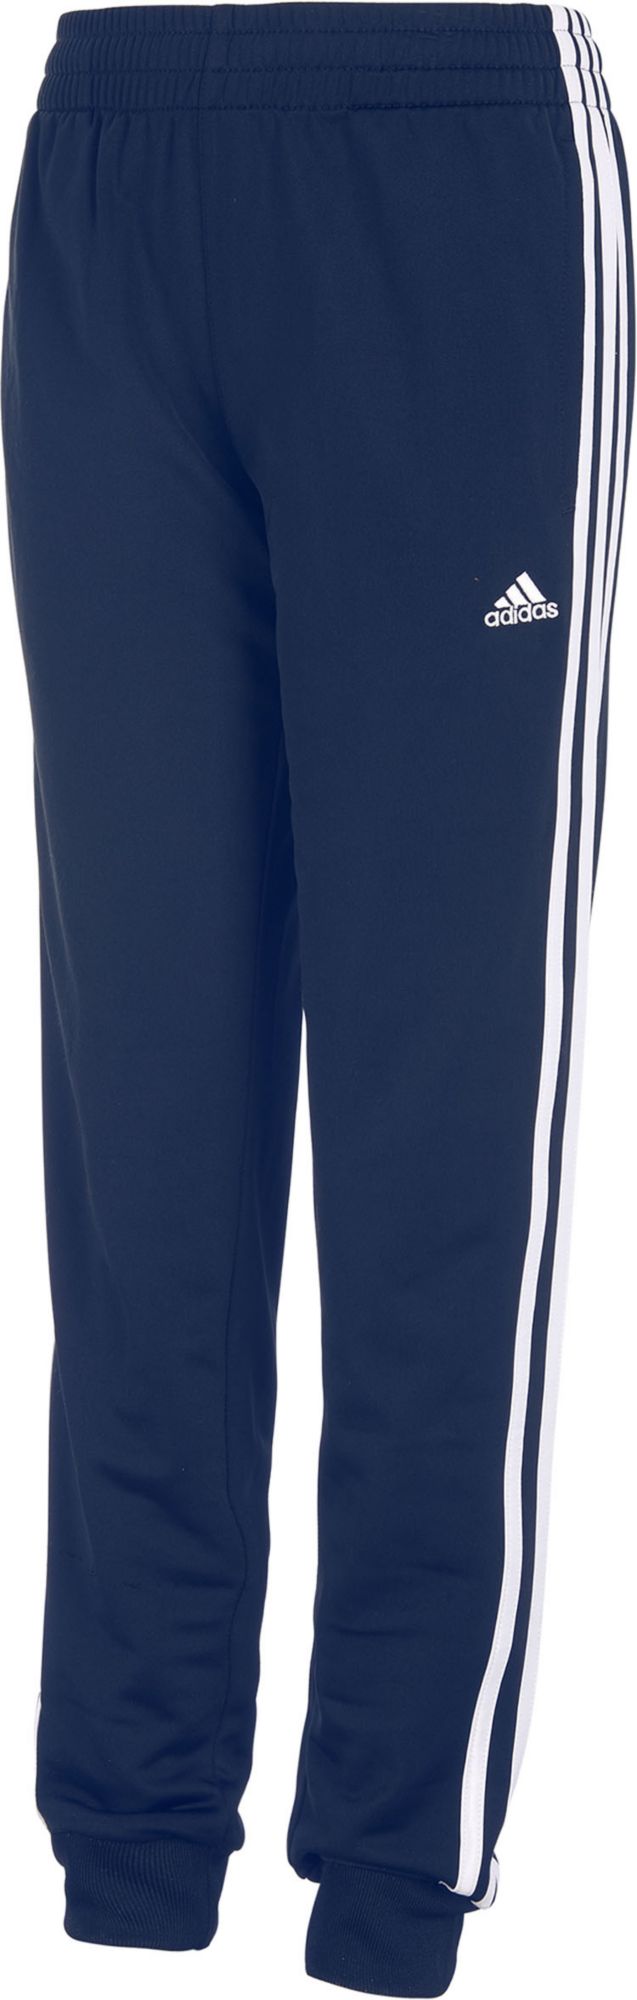 adidas youth tricot pant